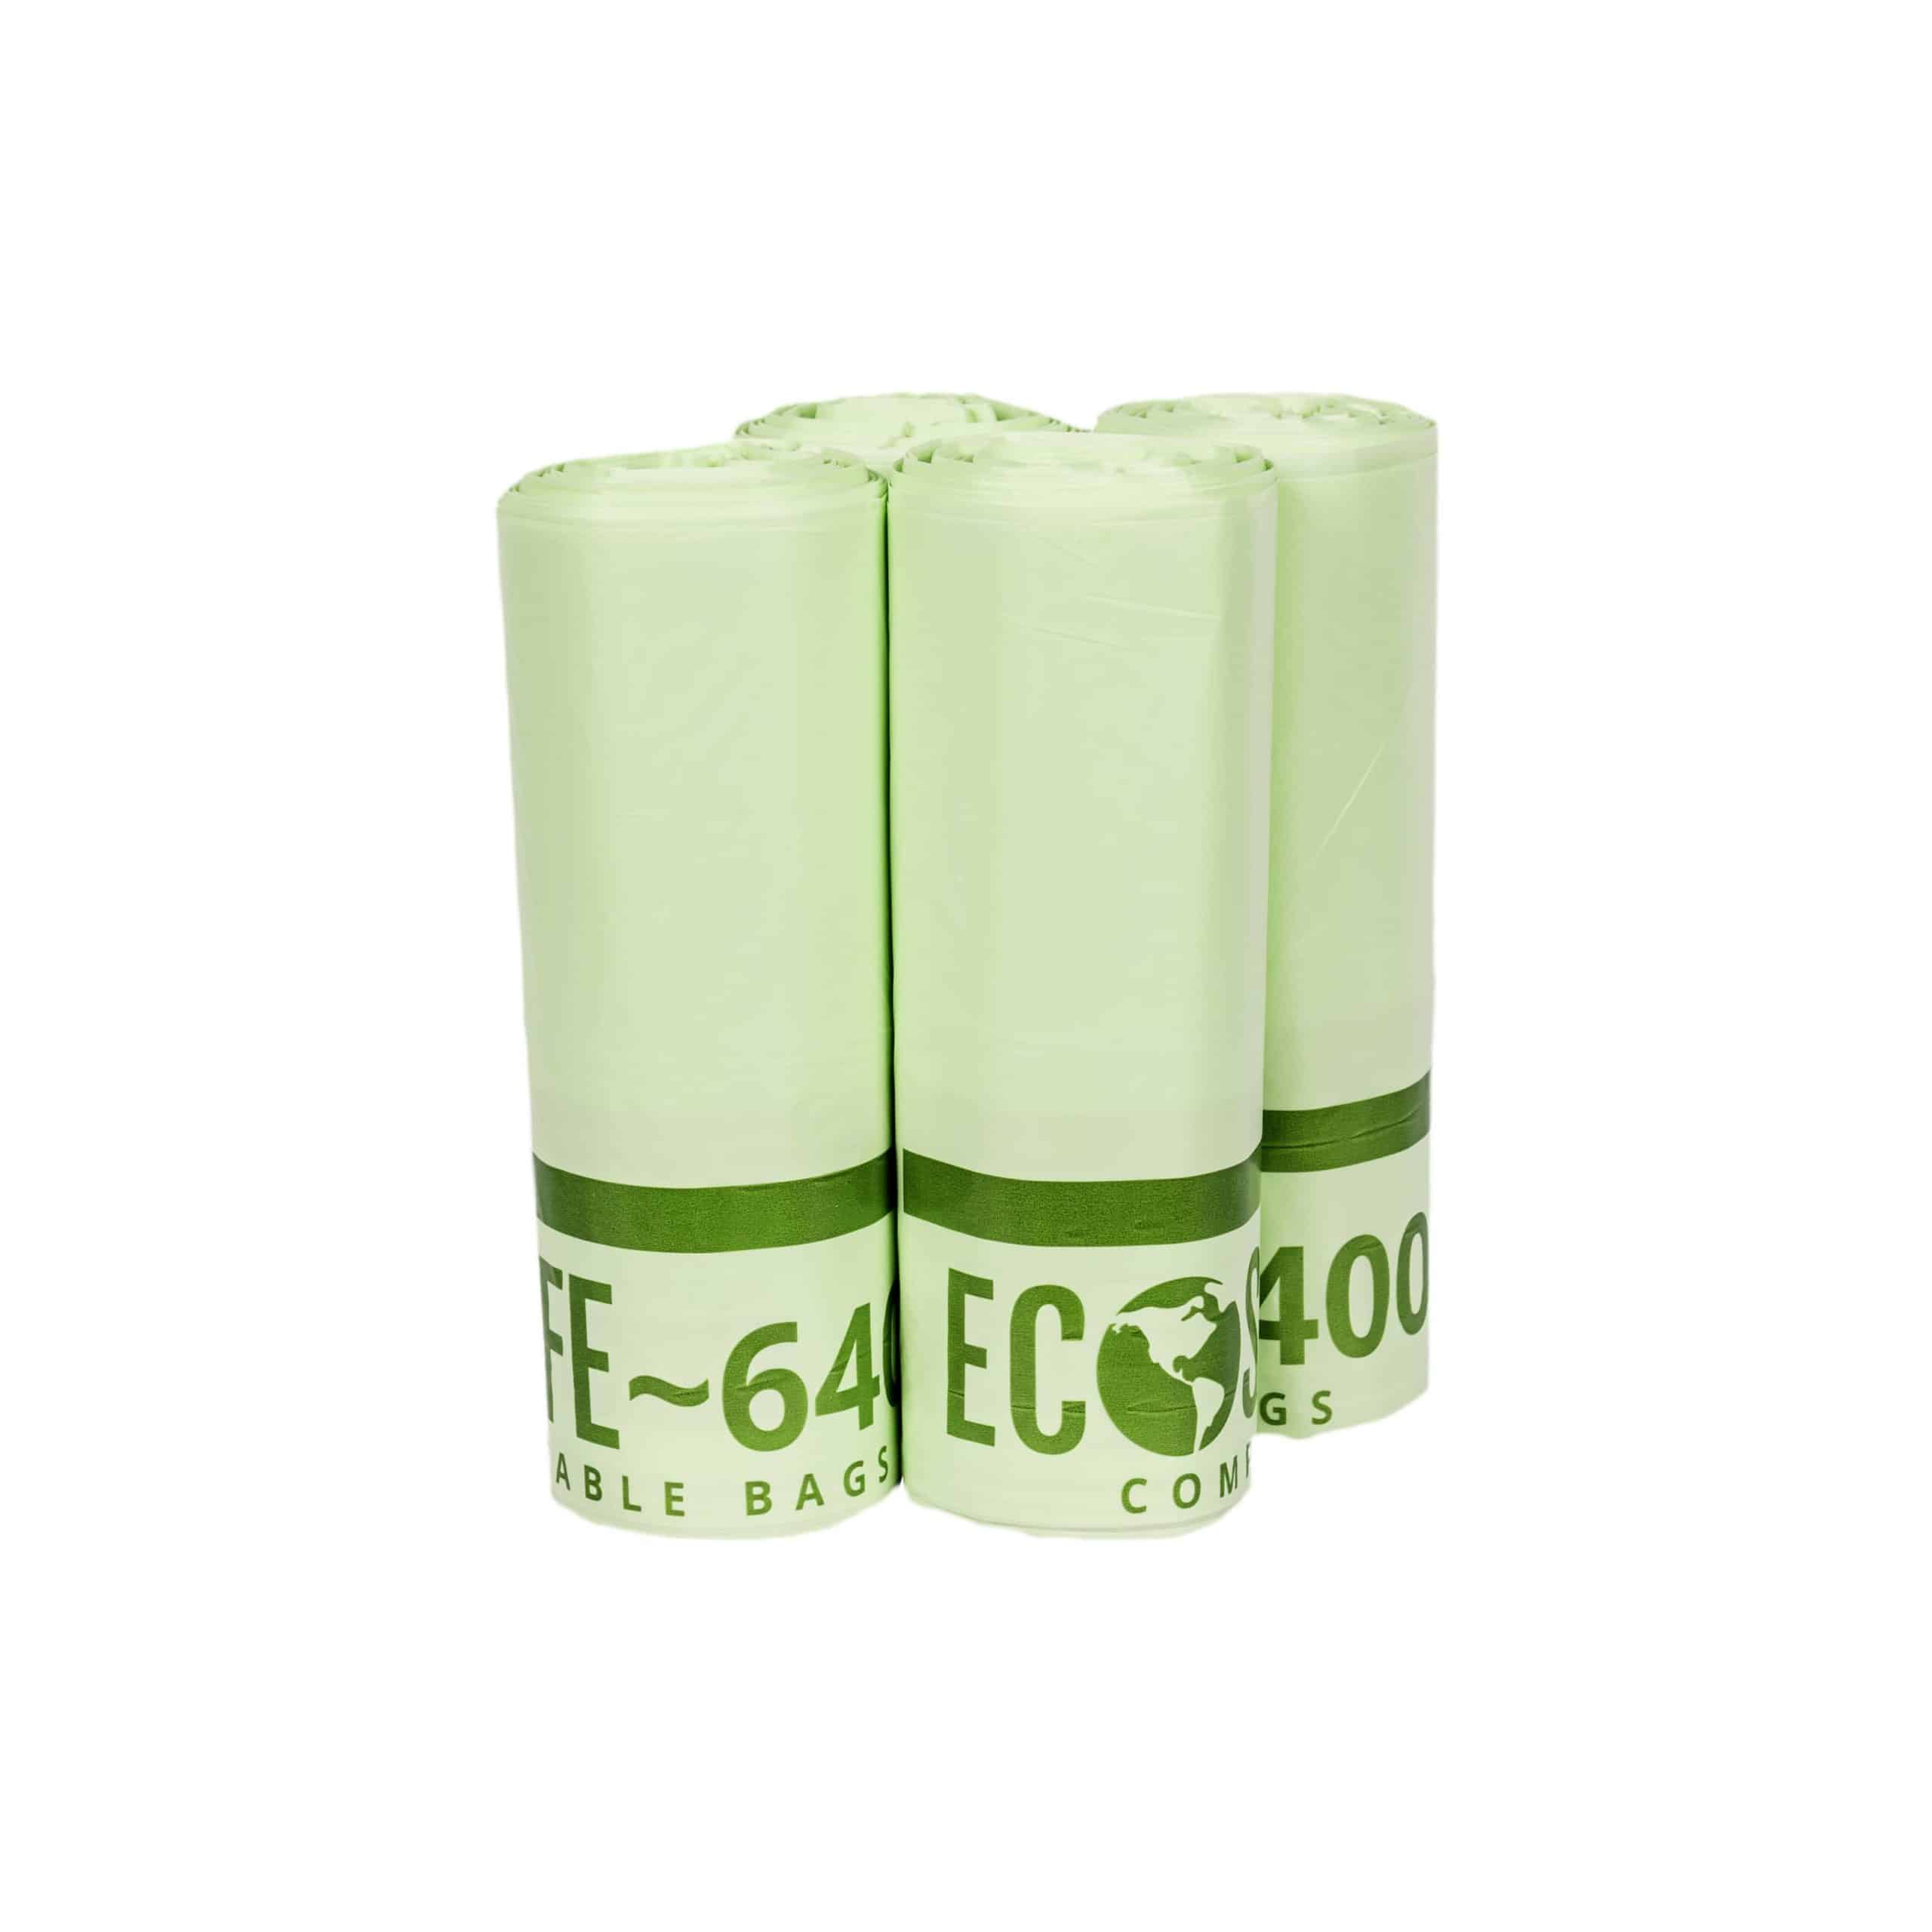 EcoSafe-Compostable-Bags-HB2636-8-Rolls-min